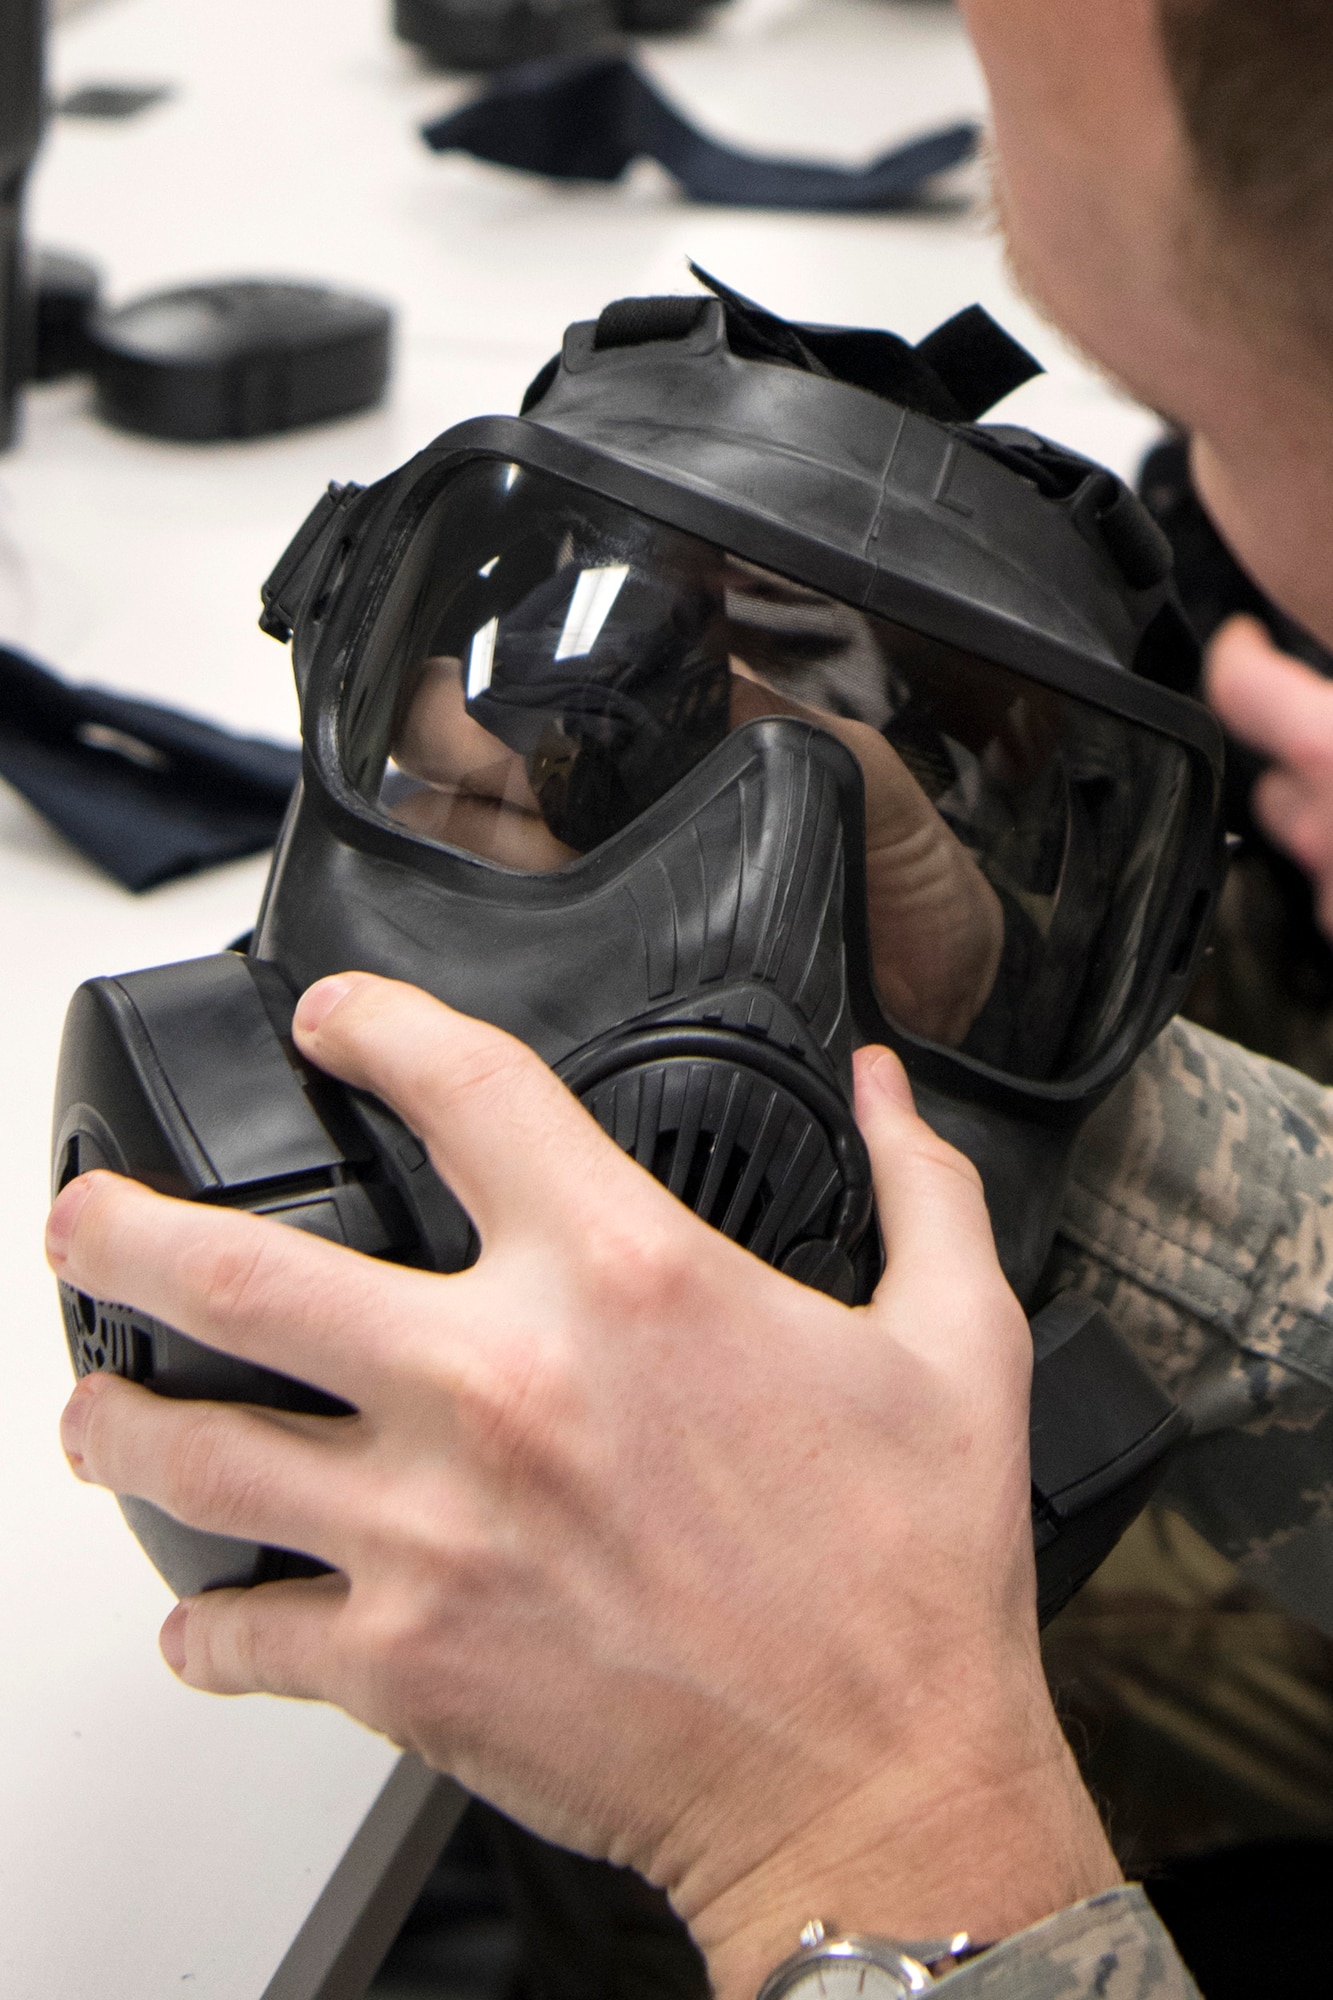 U.S. Air Force Staff. Sgt. Charles Danowski, a 673d Medical Support Squadron medical laboratory technician, cleans his the lens on his M50 series protective mask during a newly-implemented chemical, biological, radiological and nuclear defense training course at Joint Base Elmendorf-Richardson, Alaska, Jan. 8, 2019. One of the key changes made embraces the reintegration of hands-on, in-person instruction, and reduces computer based training, allowing Airmen to receive a more tailored learning experience.